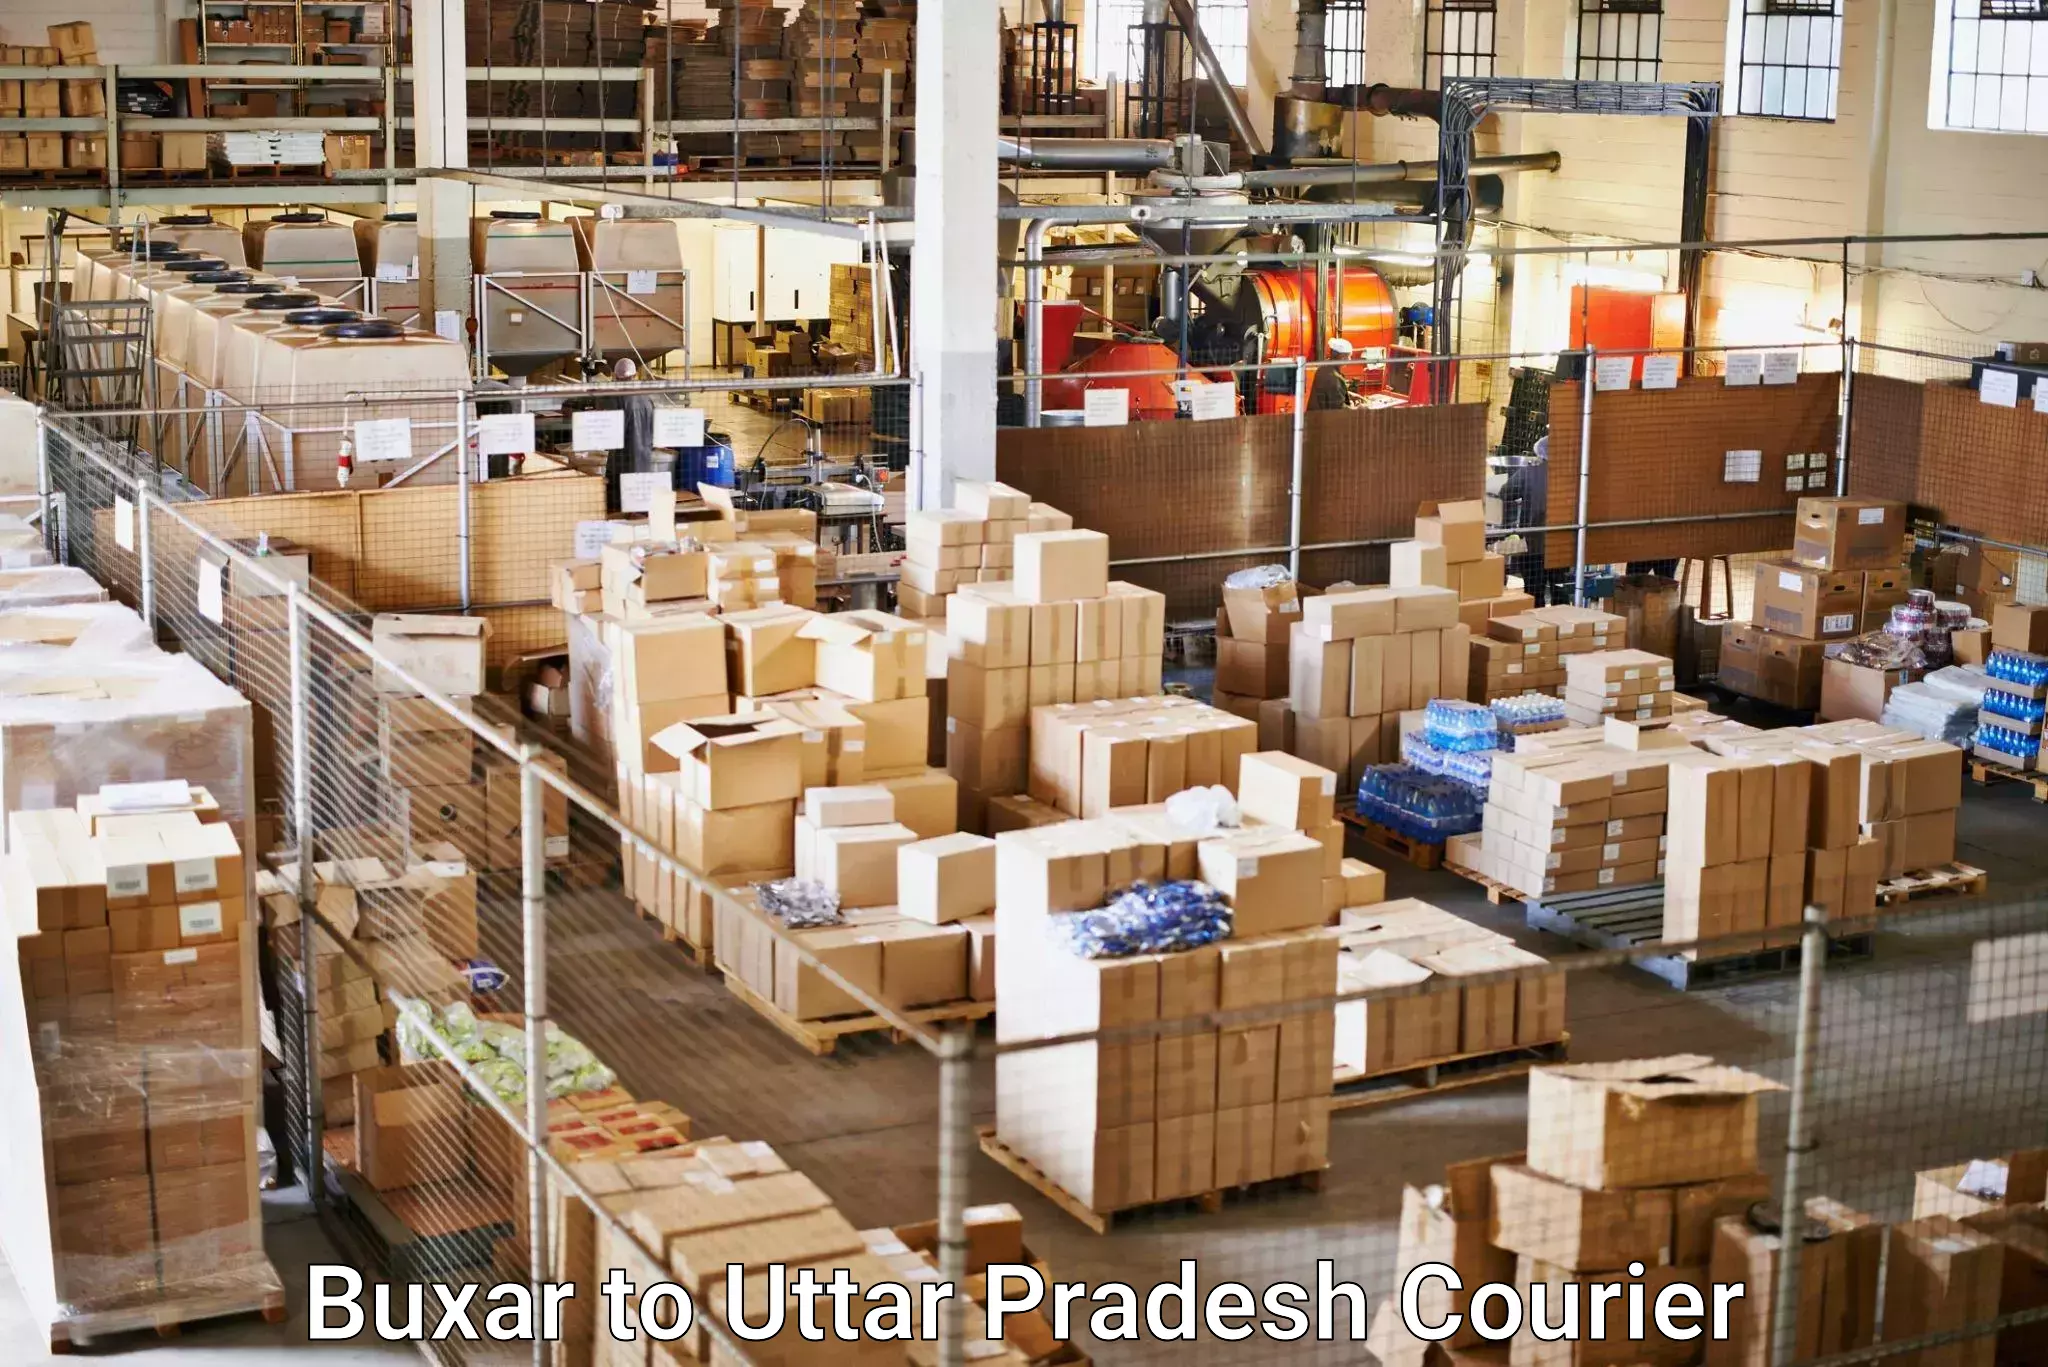 Expedited shipping methods Buxar to Sitapur